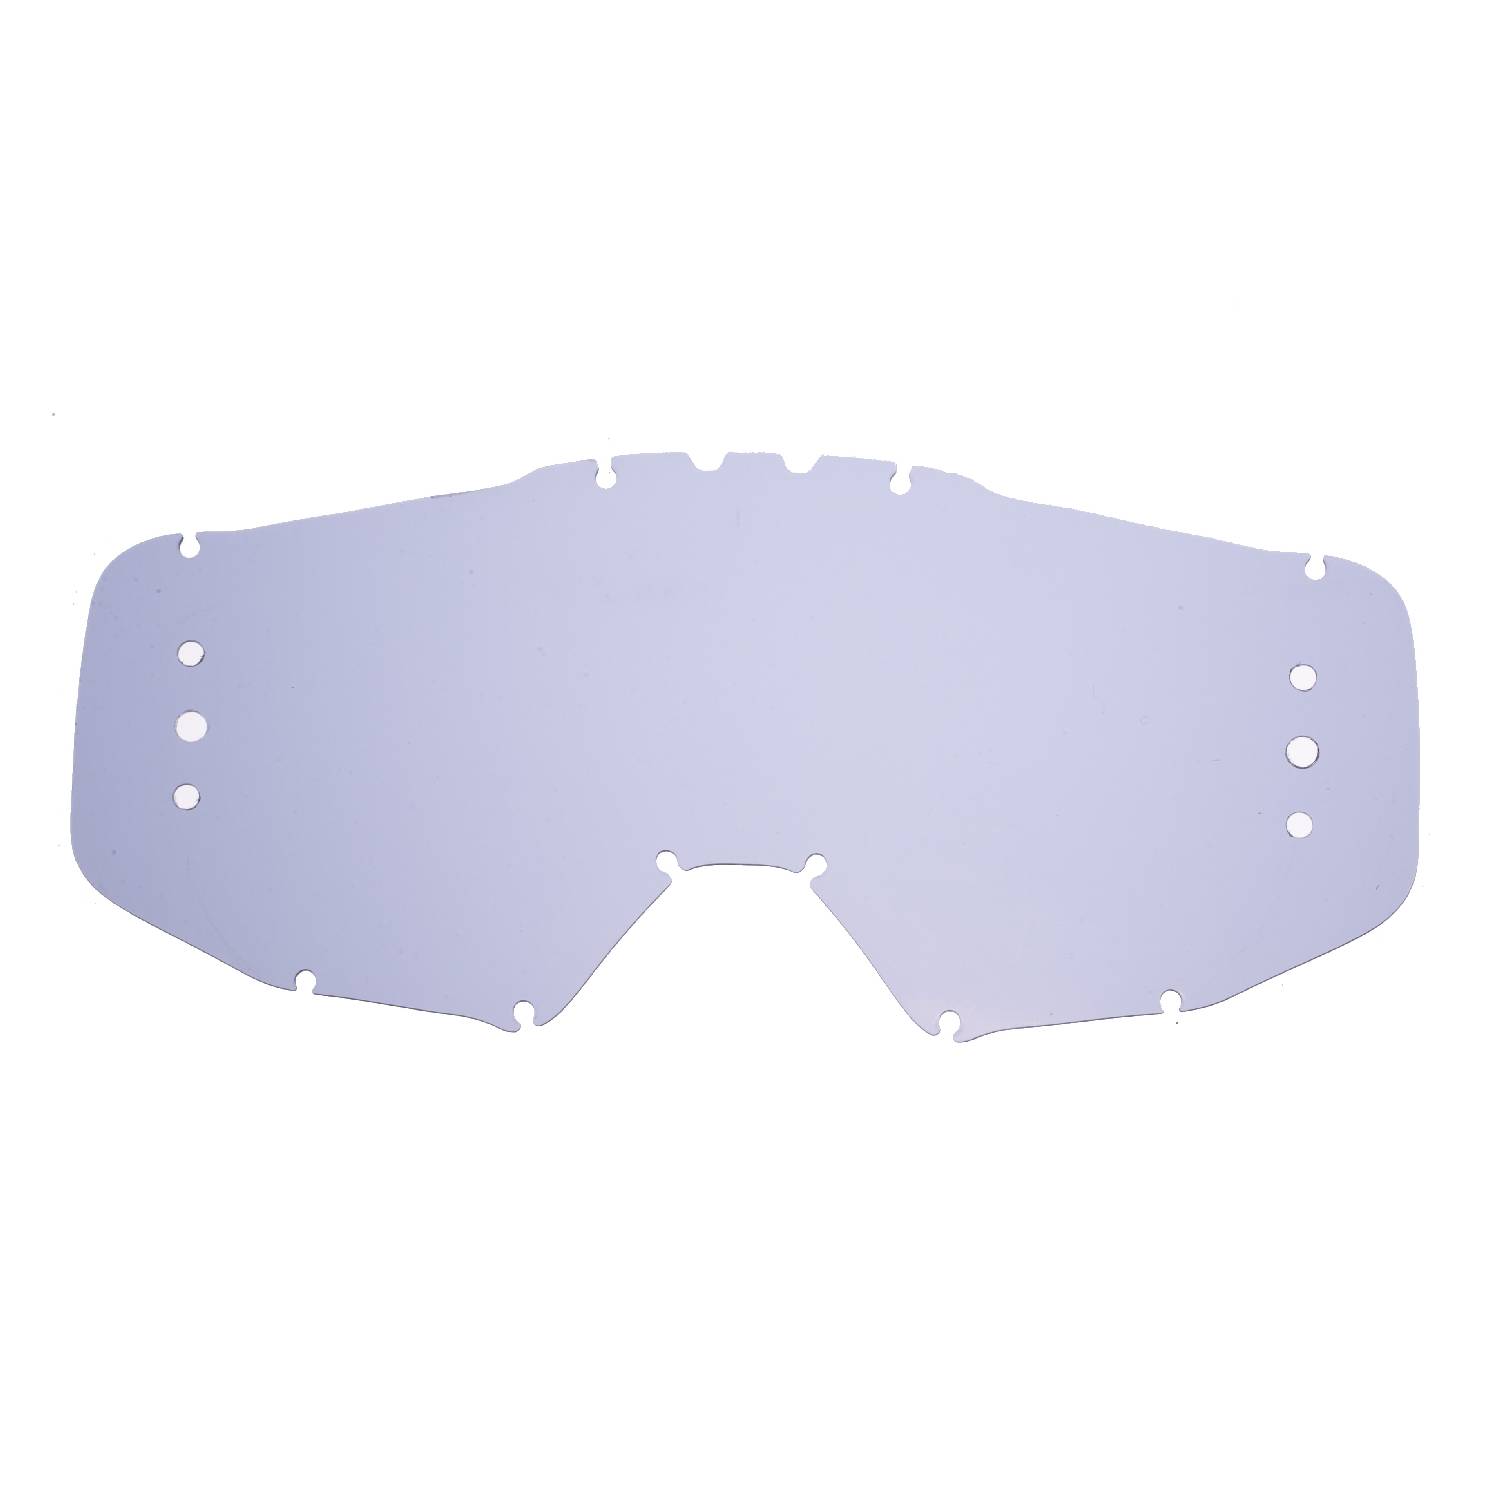 ROLL-OFF Smoked replacement lens compatible for Just1 Iris / Vitro goggle